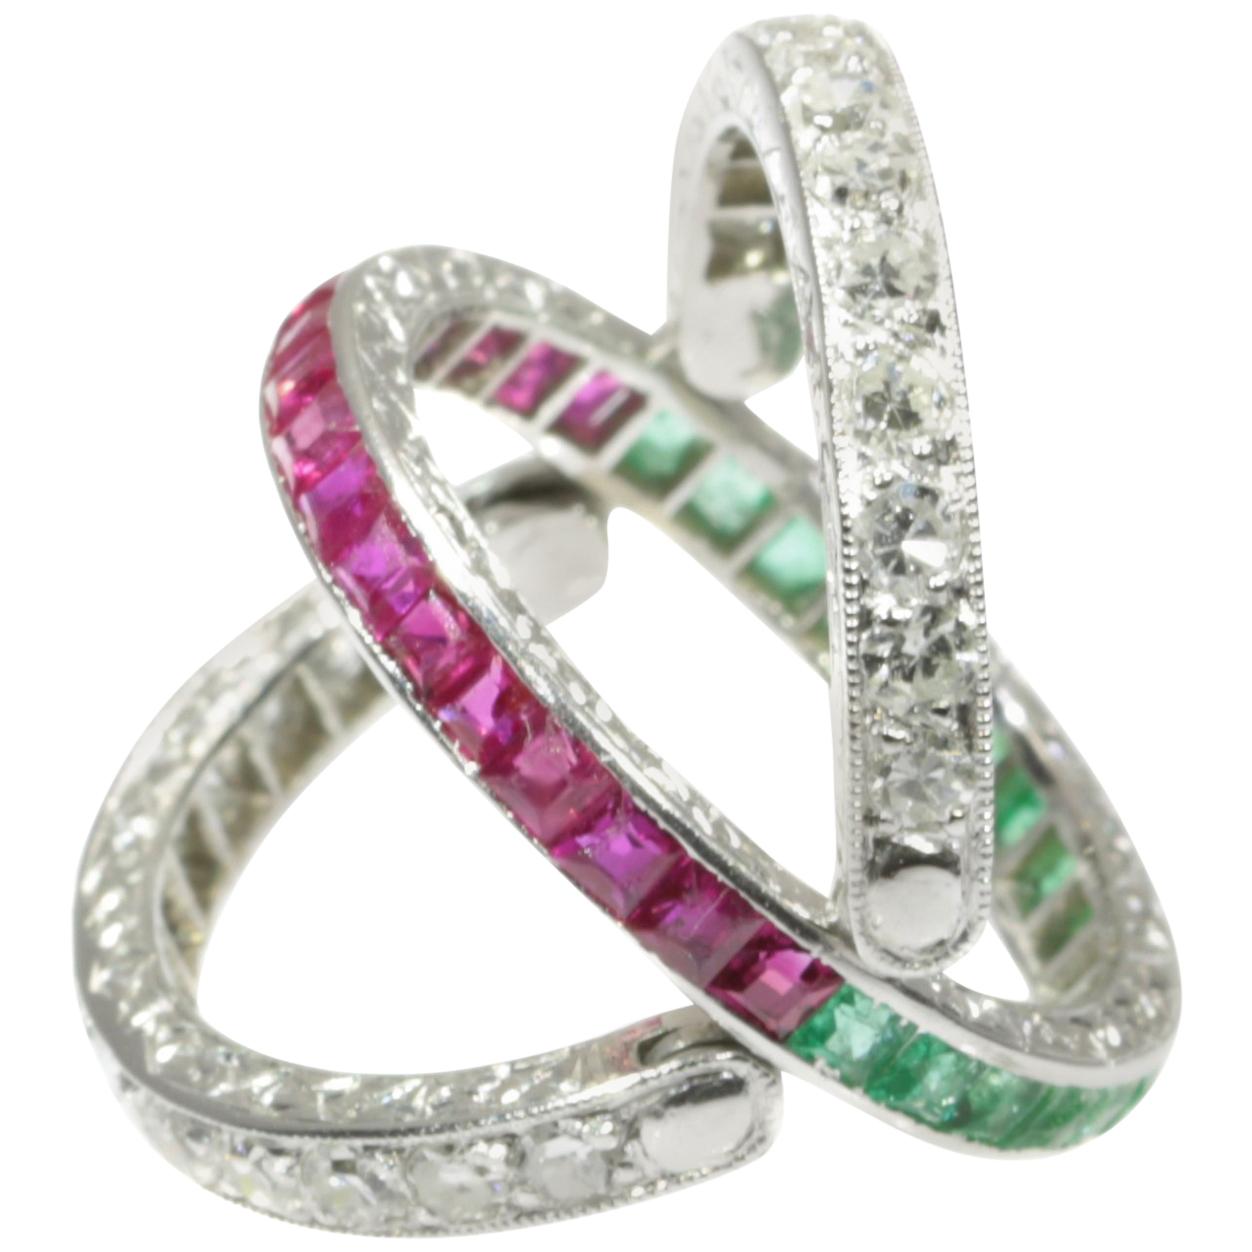 Magnificent Eternity Band with Rubies and Emeralds and Hinged Diamond Parts